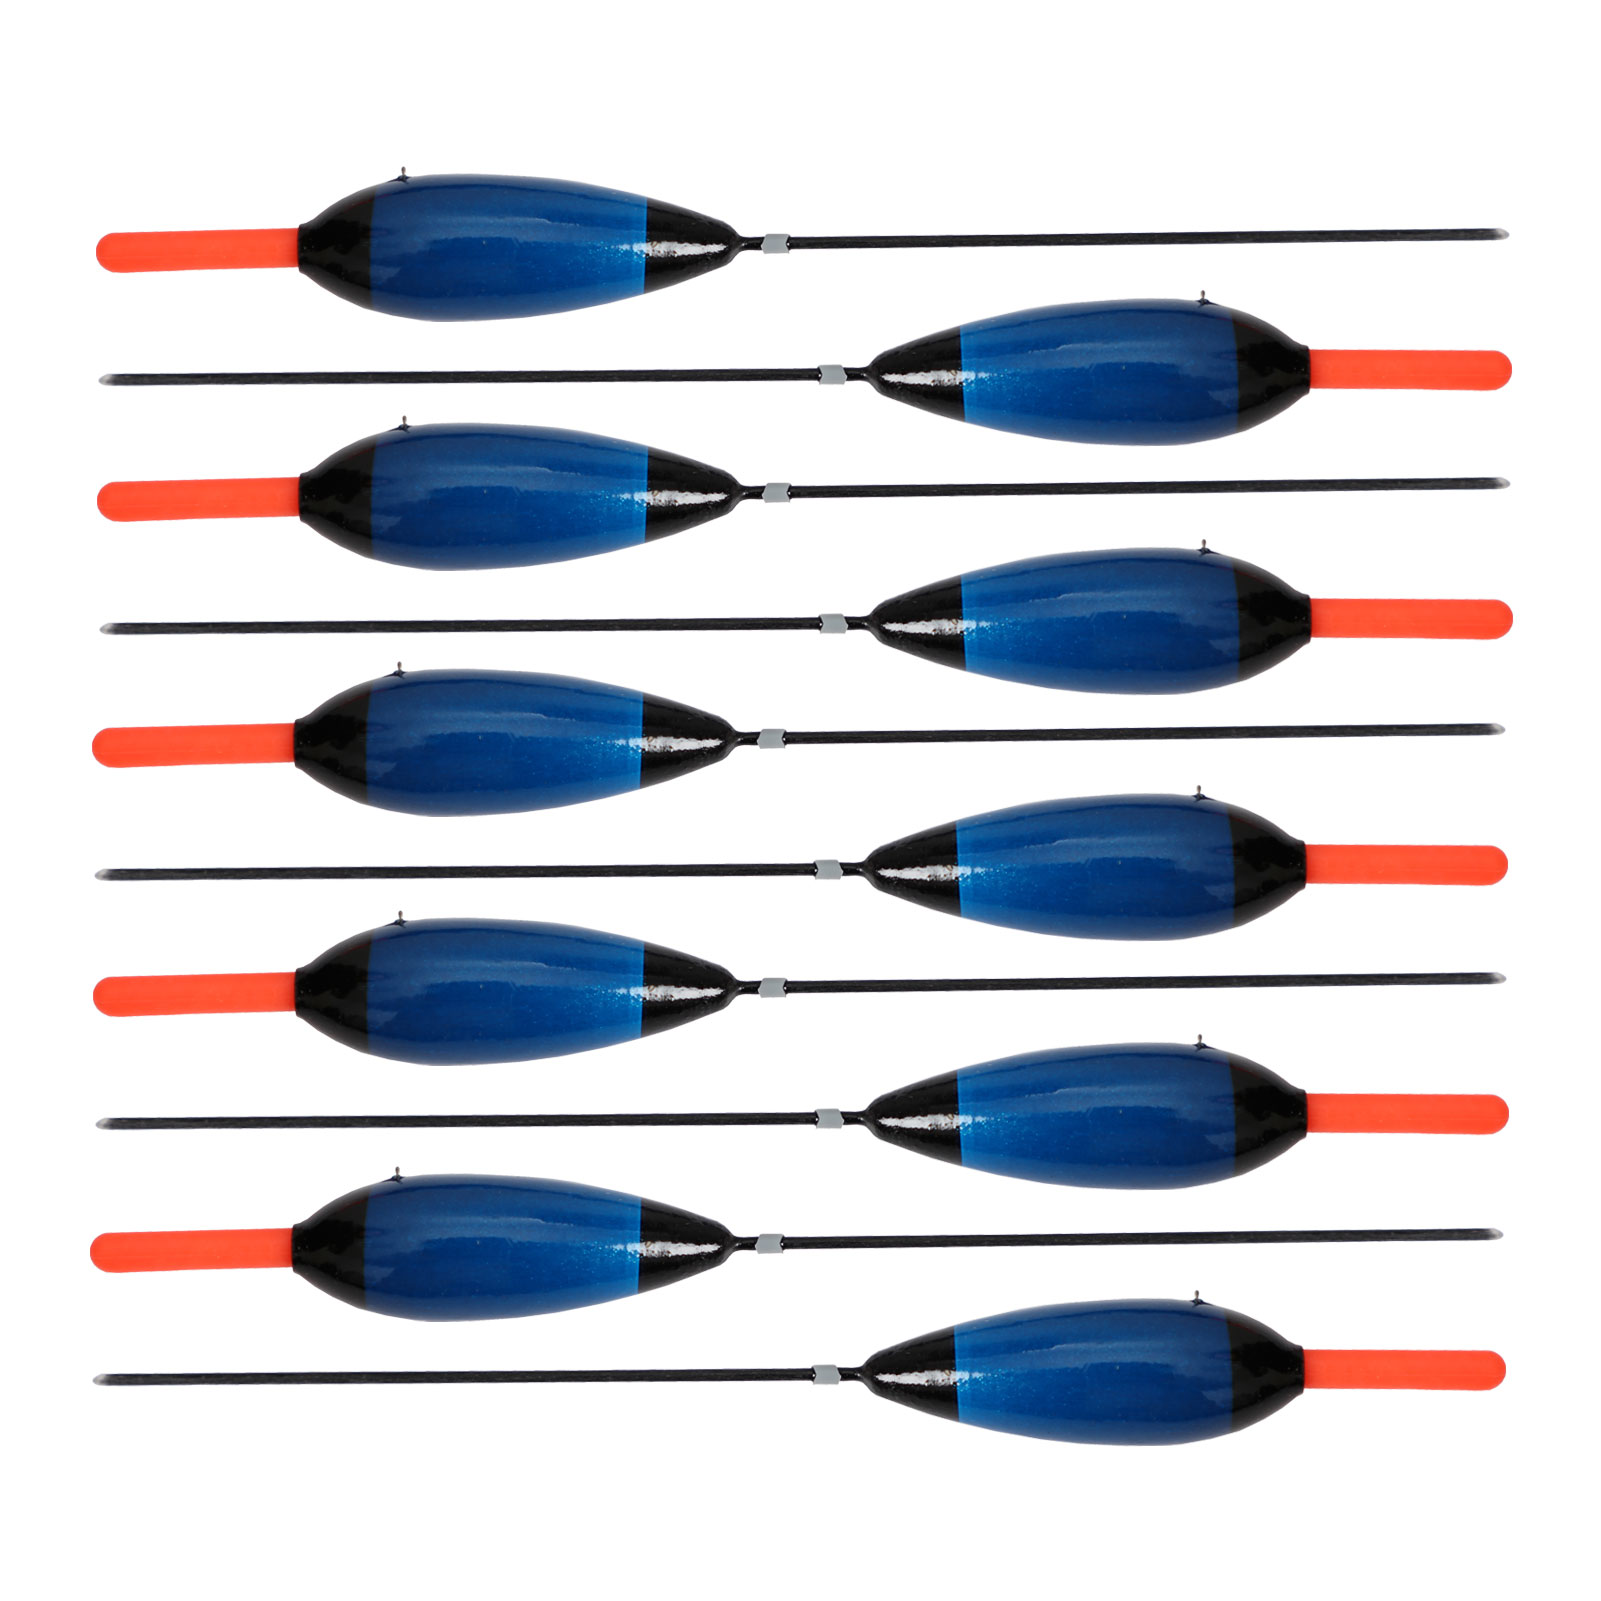 FREE FISHER 10pcs/lot Fishing Floats Wood Hard Long-Tail Cork Plastic Bobbers Buoy 3g/16.5cm Buoyancy 2g Fishing Tackle Accessories Pesca